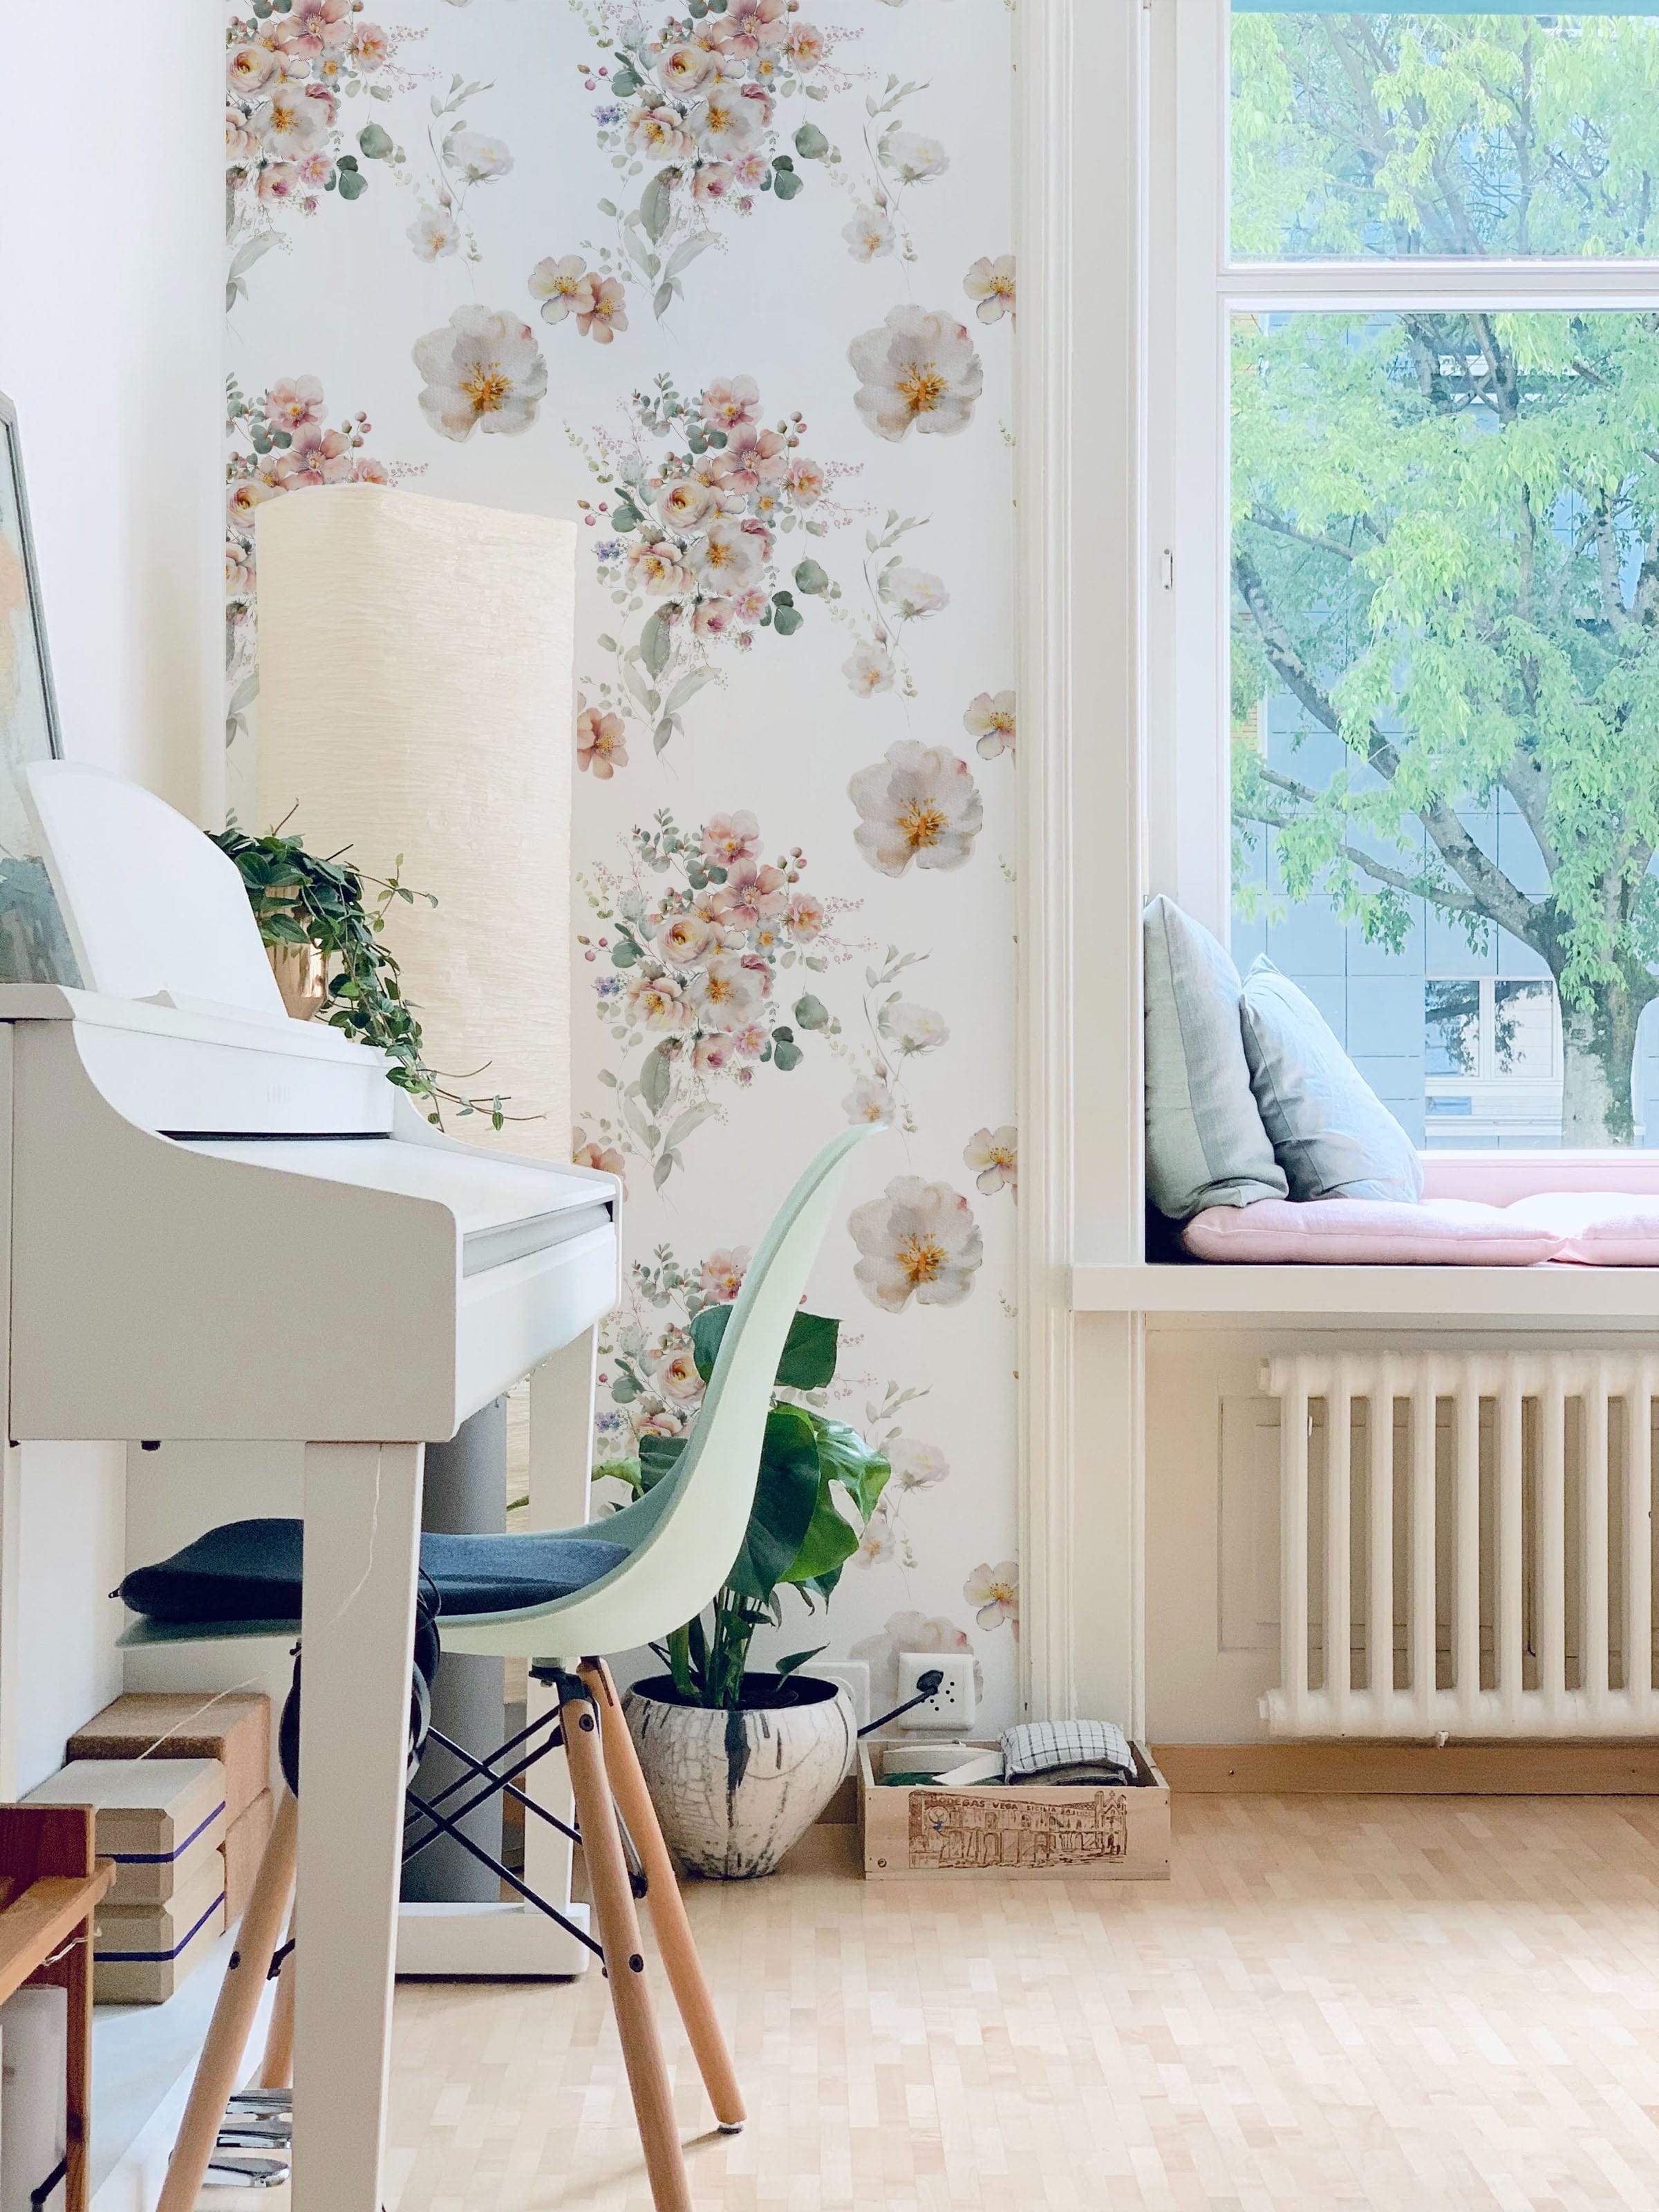 A cozy, well-lit room with a white piano and a green chair. The wall is adorned with Wild Flora Wallpaper, featuring delicate floral arrangements in soft, pastel colors. The window seat is filled with cushions, creating a serene and inviting atmosphere perfect for relaxation.